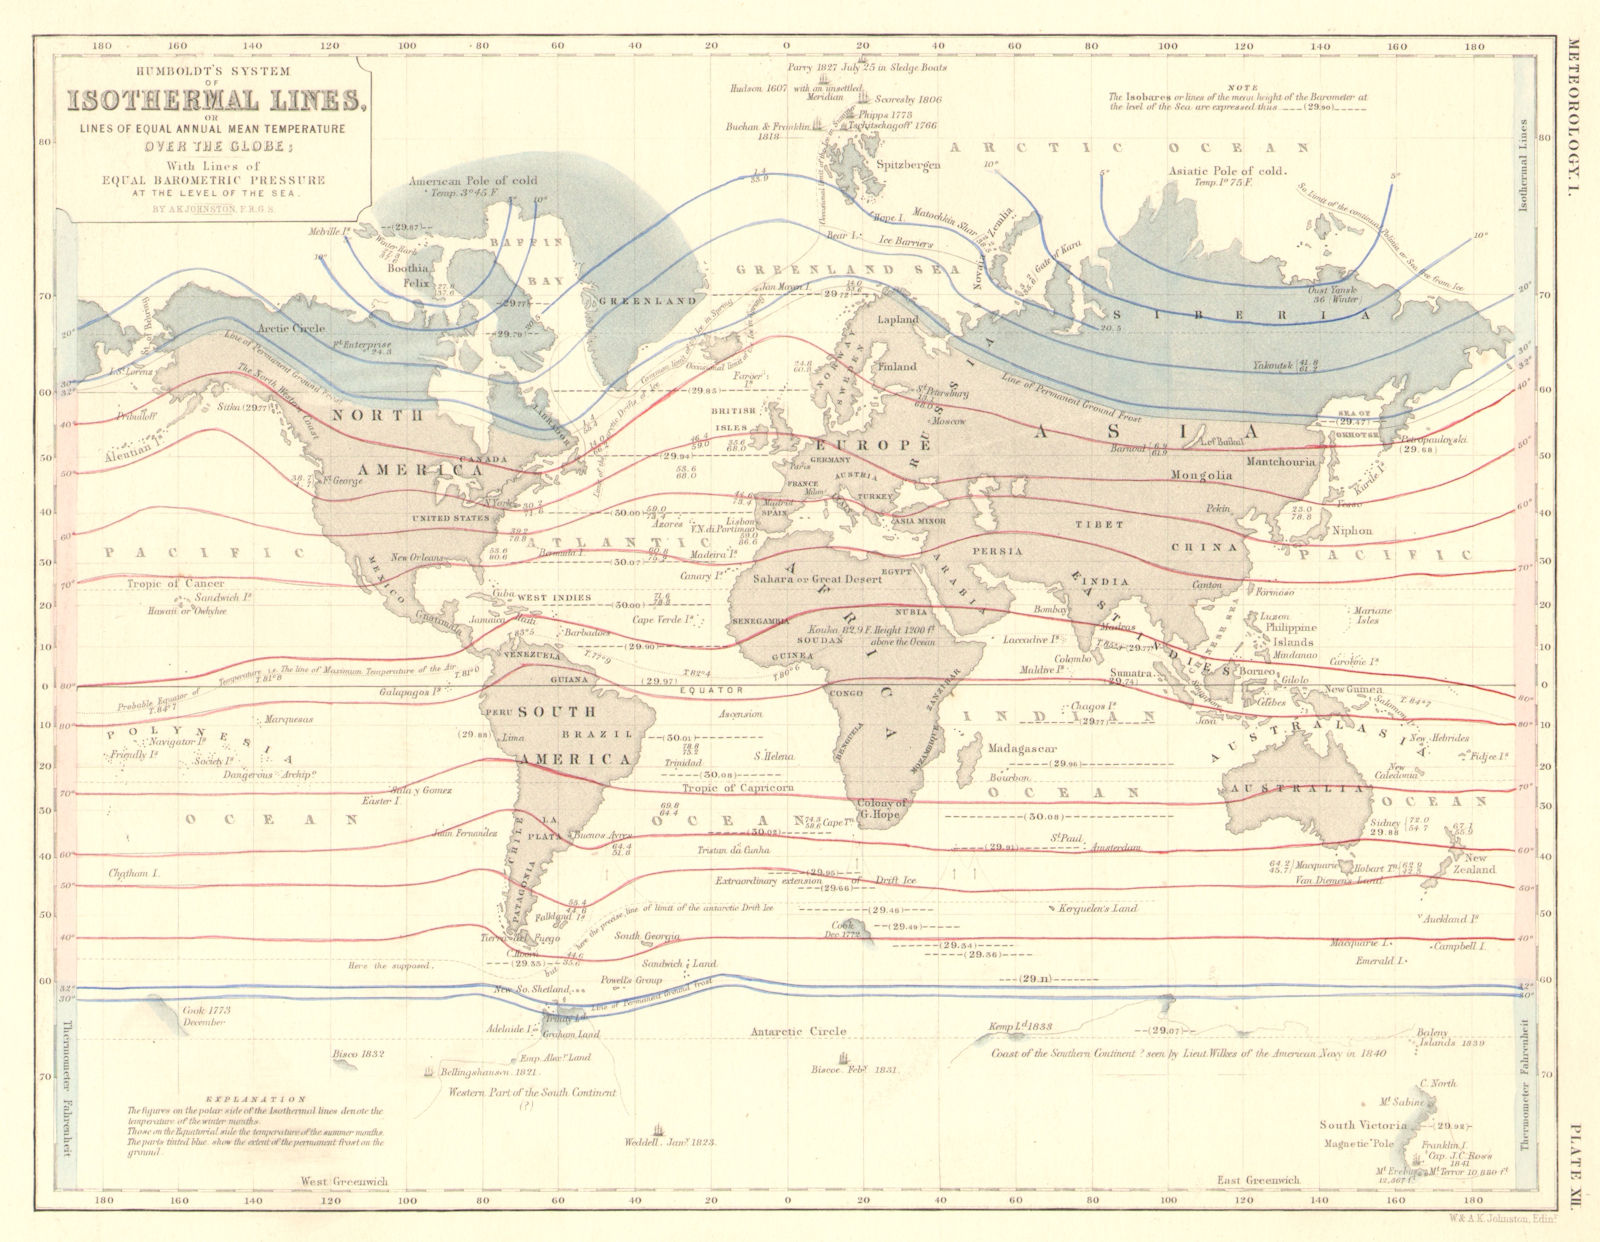 WORLD. Humboldt's isothermal lines (equal annual mean temperature) 1850 map